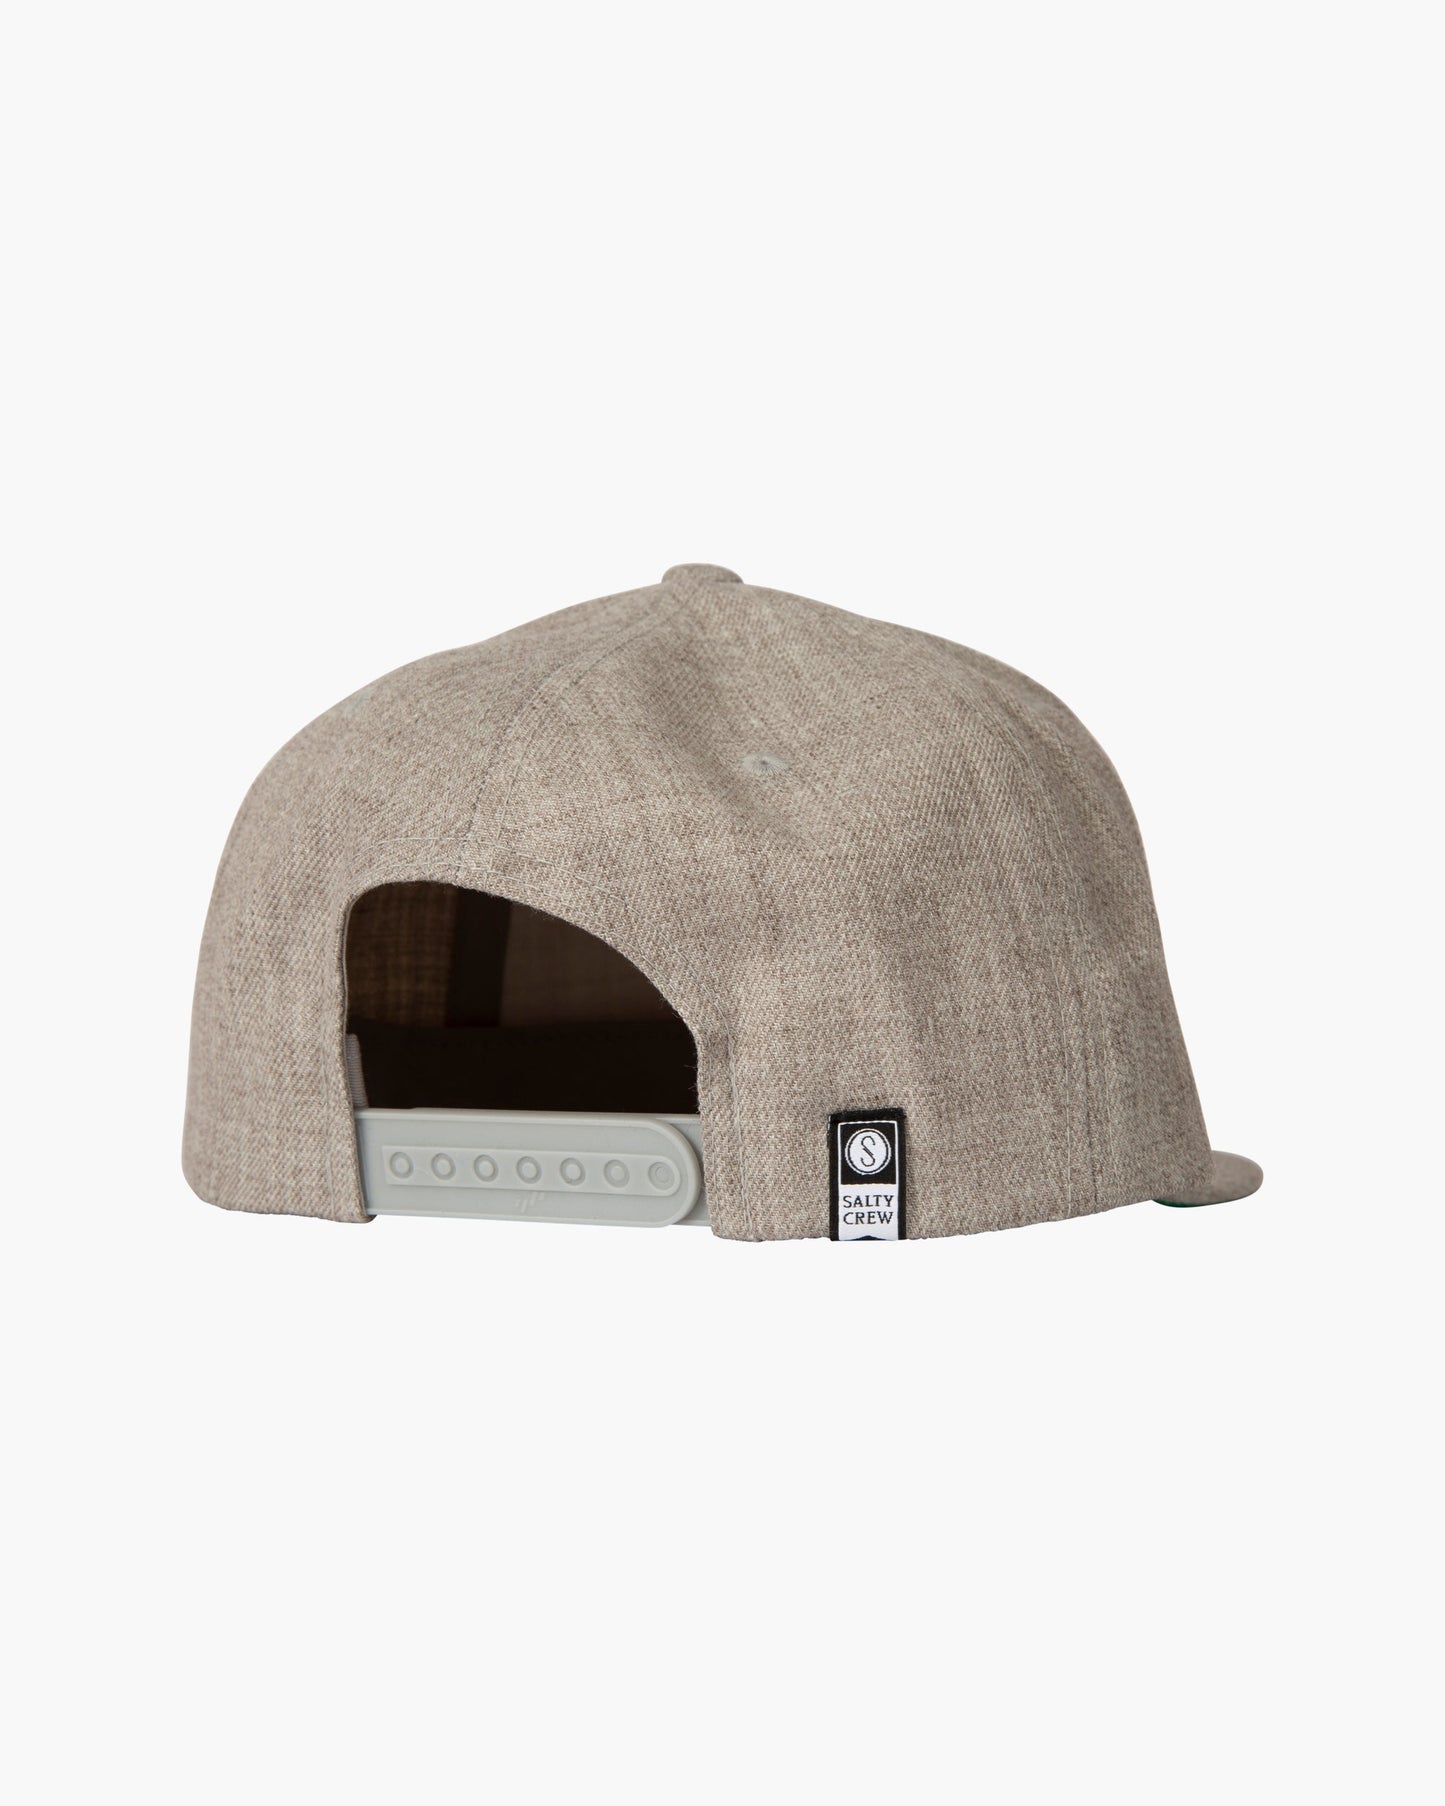 TIGHT LINES 6 PANEL - Oatmeal